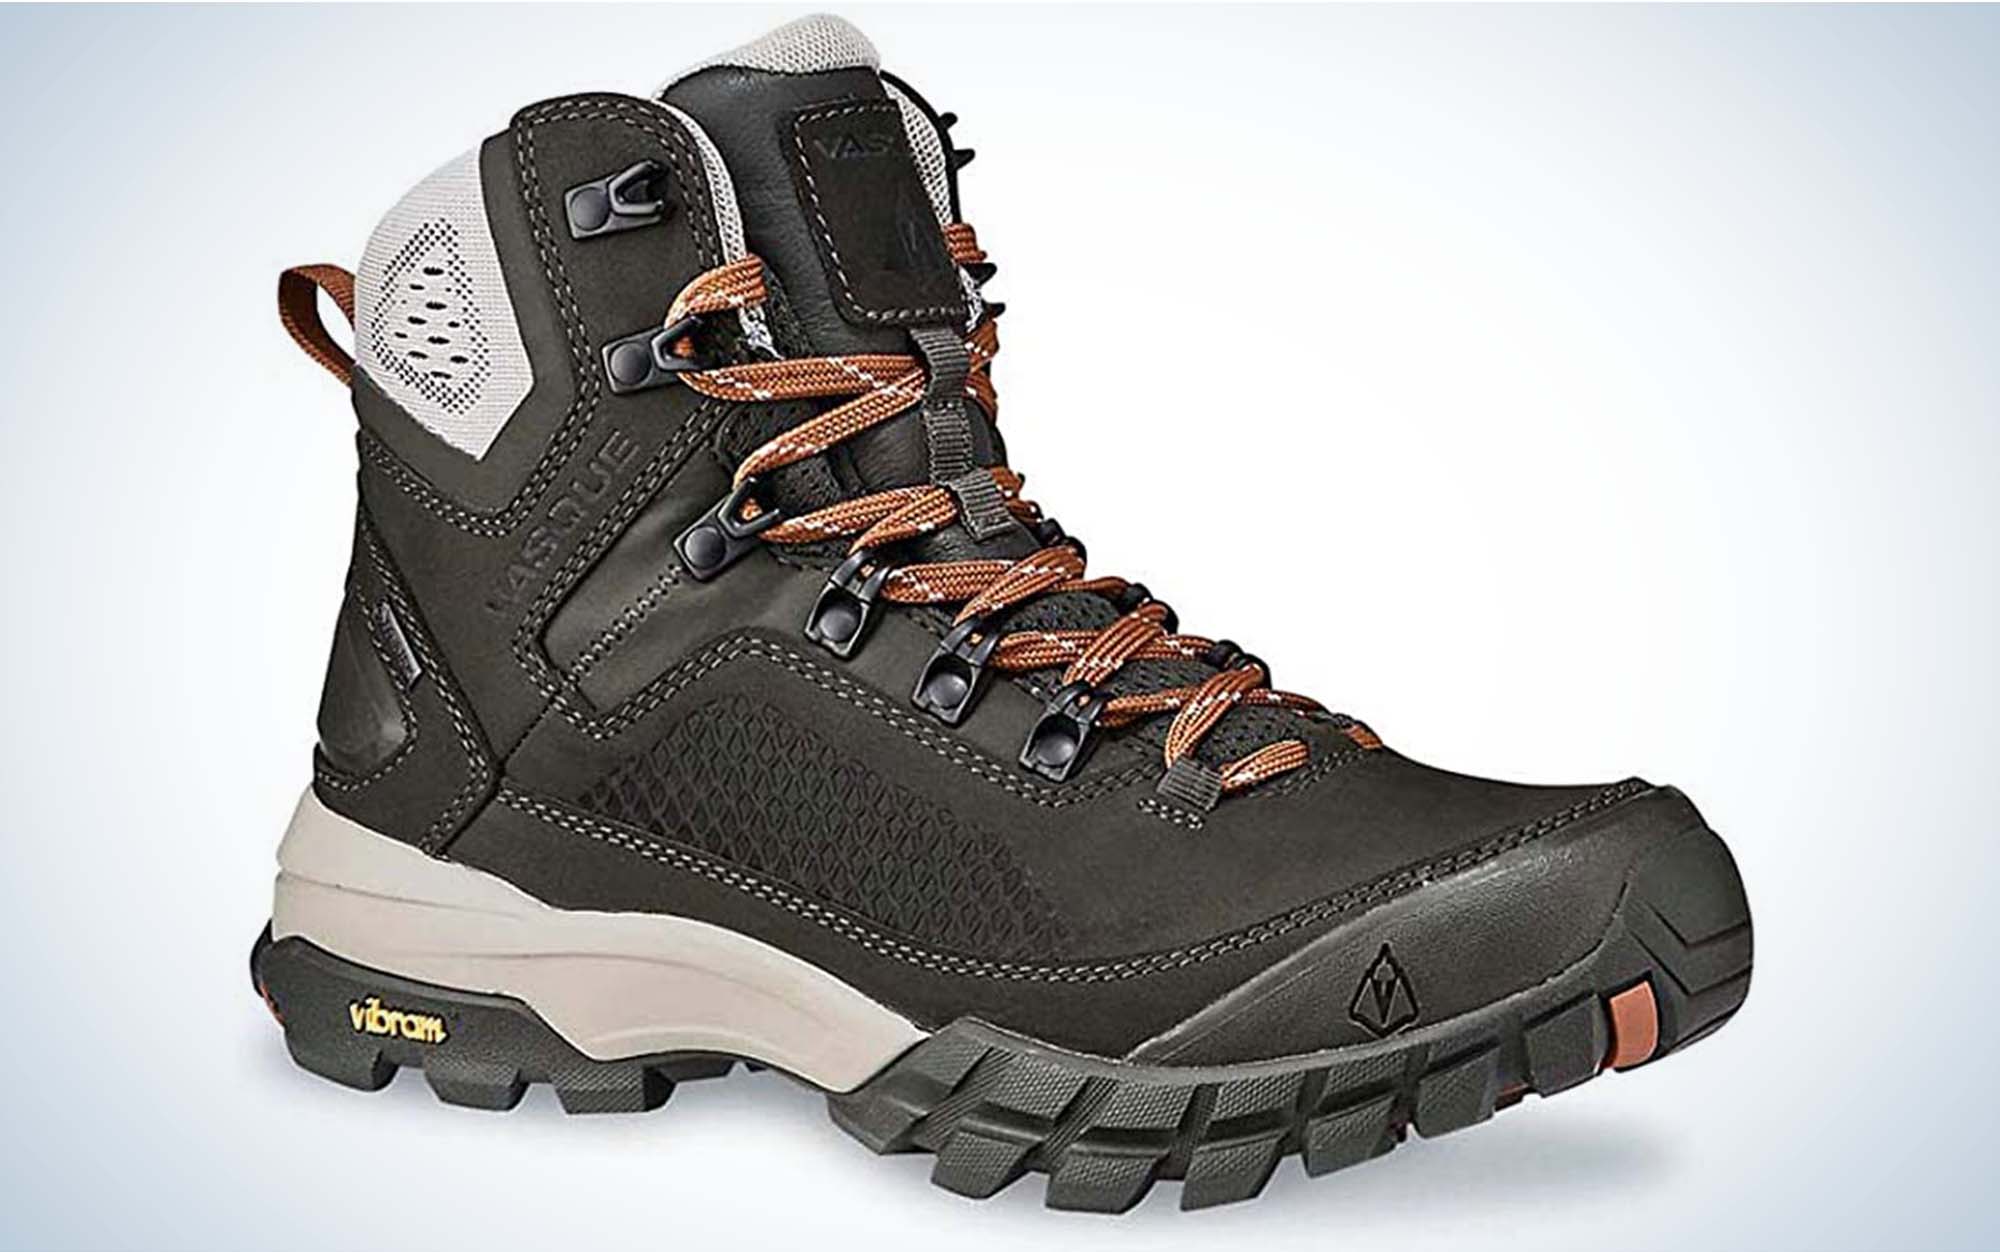 The Vasque Talus XT GTX are the most versatile hiking boots for women.